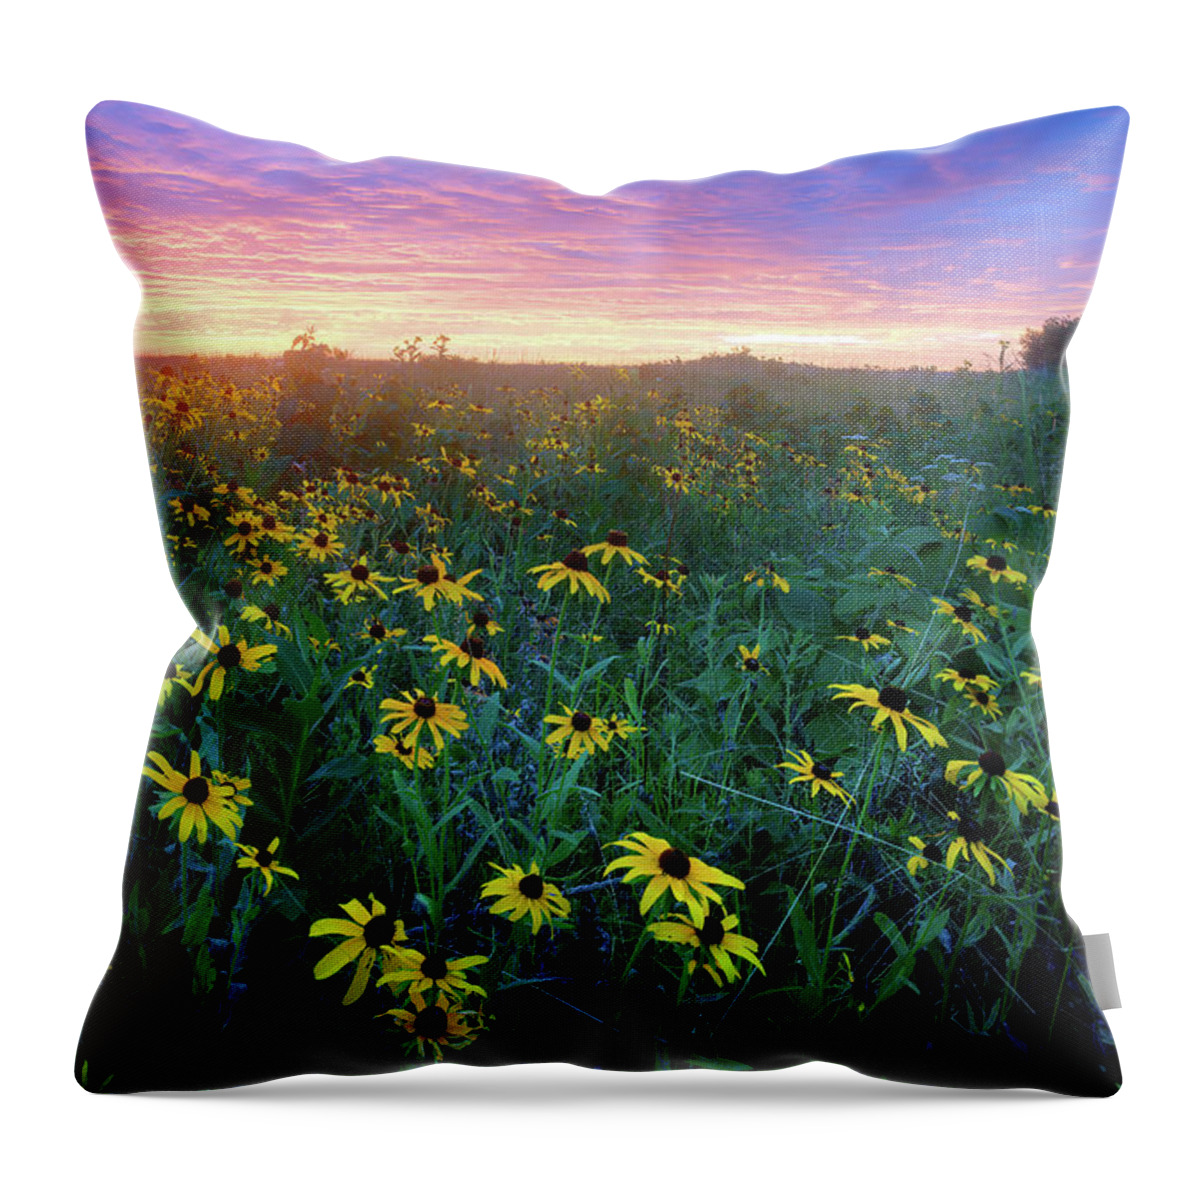 Conservation Area Throw Pillow featuring the photograph Paintbrush Prairie IV by Robert Charity